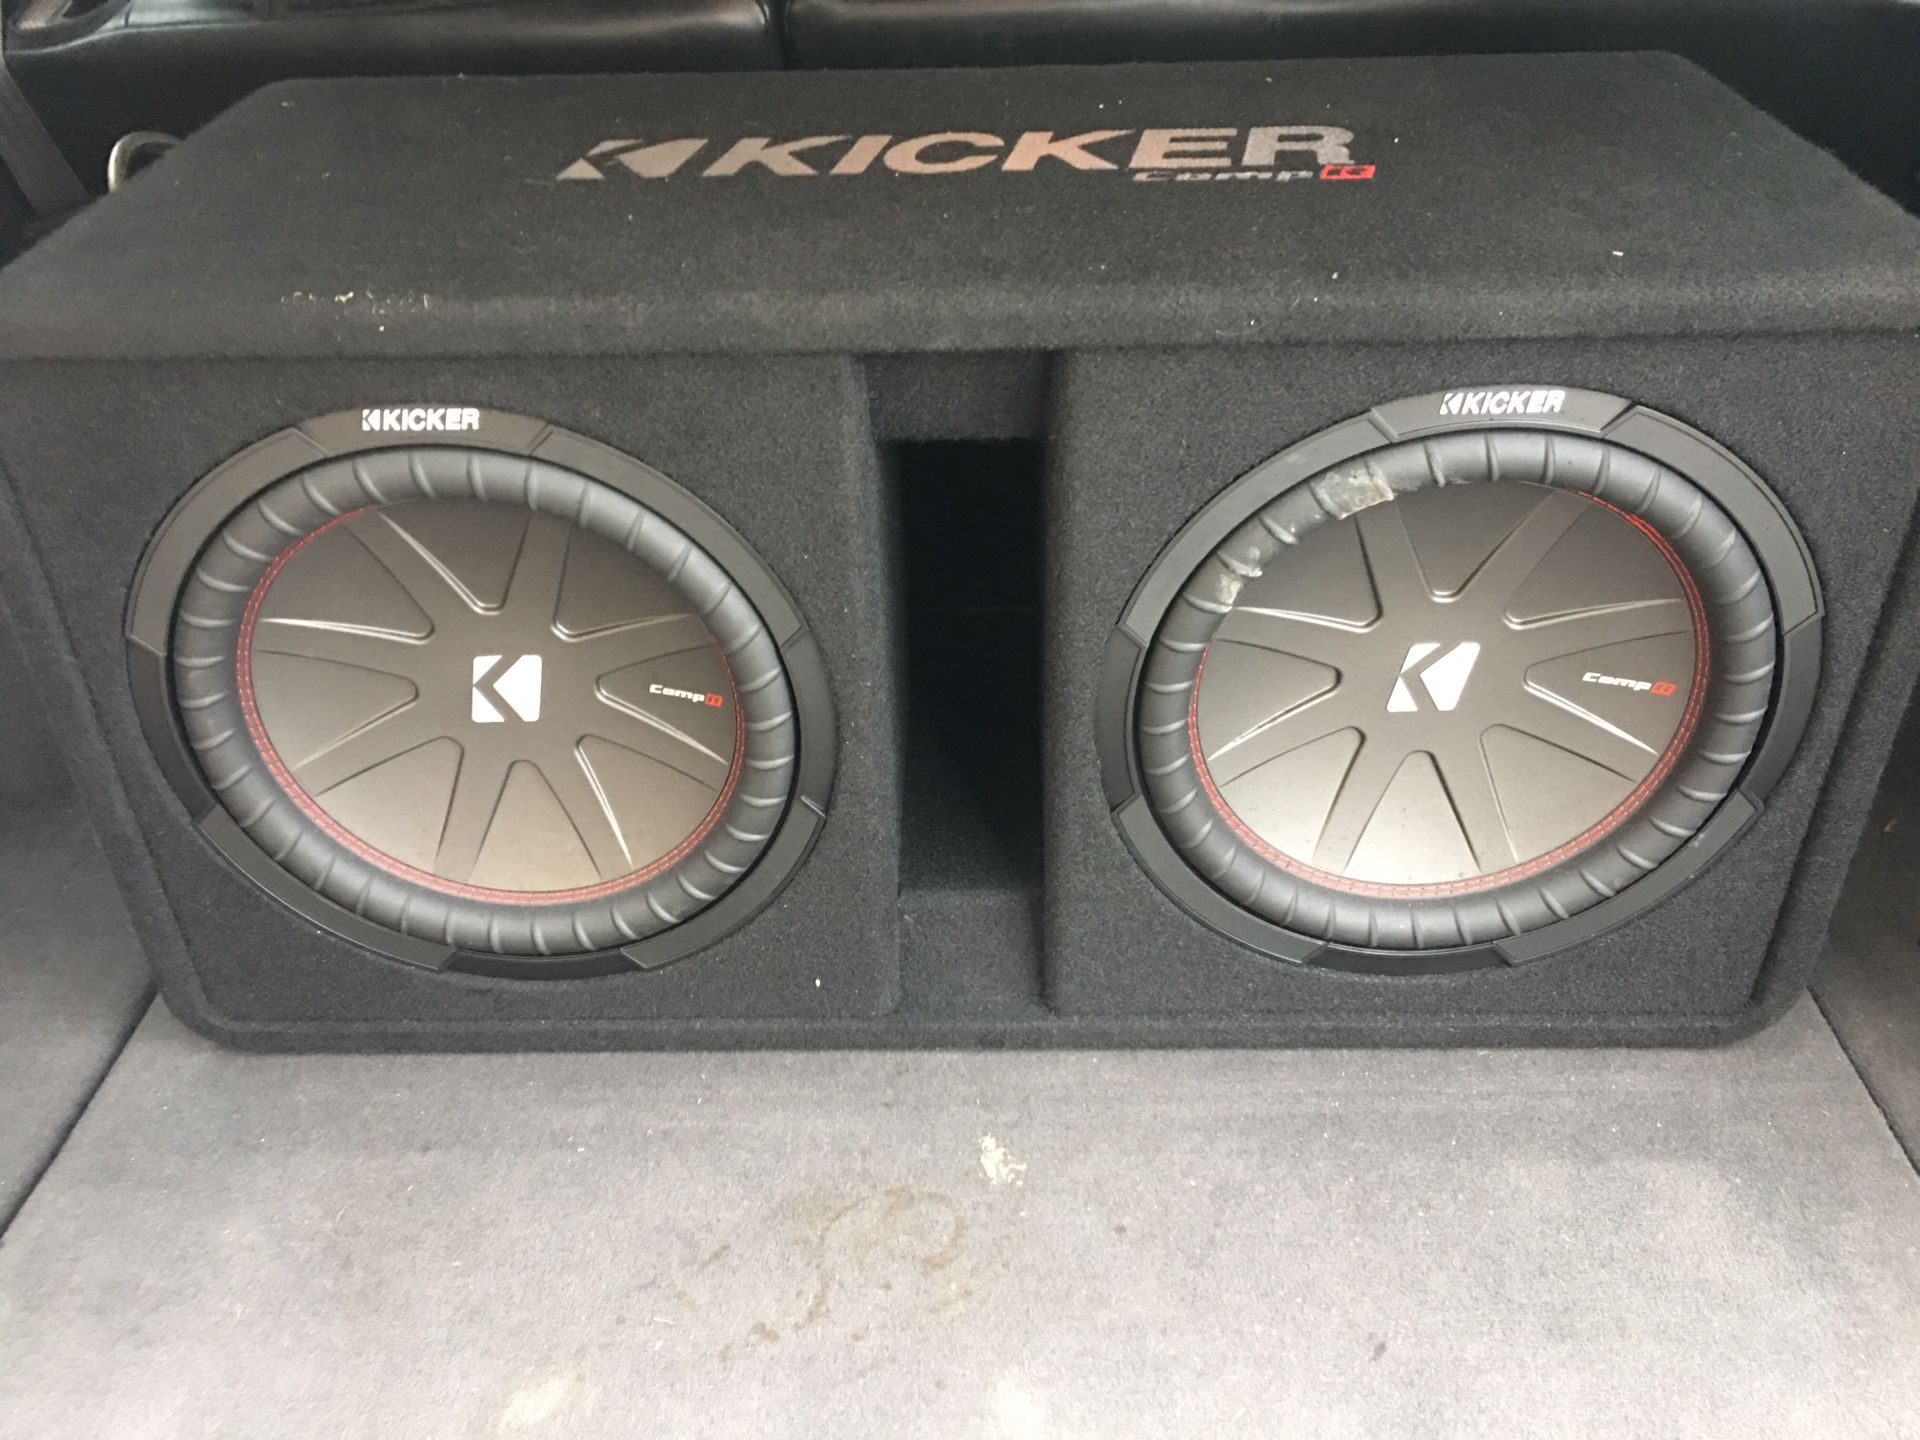 Dual Kicker 12’ Subs with customized Kicker (ported) box including capacitor